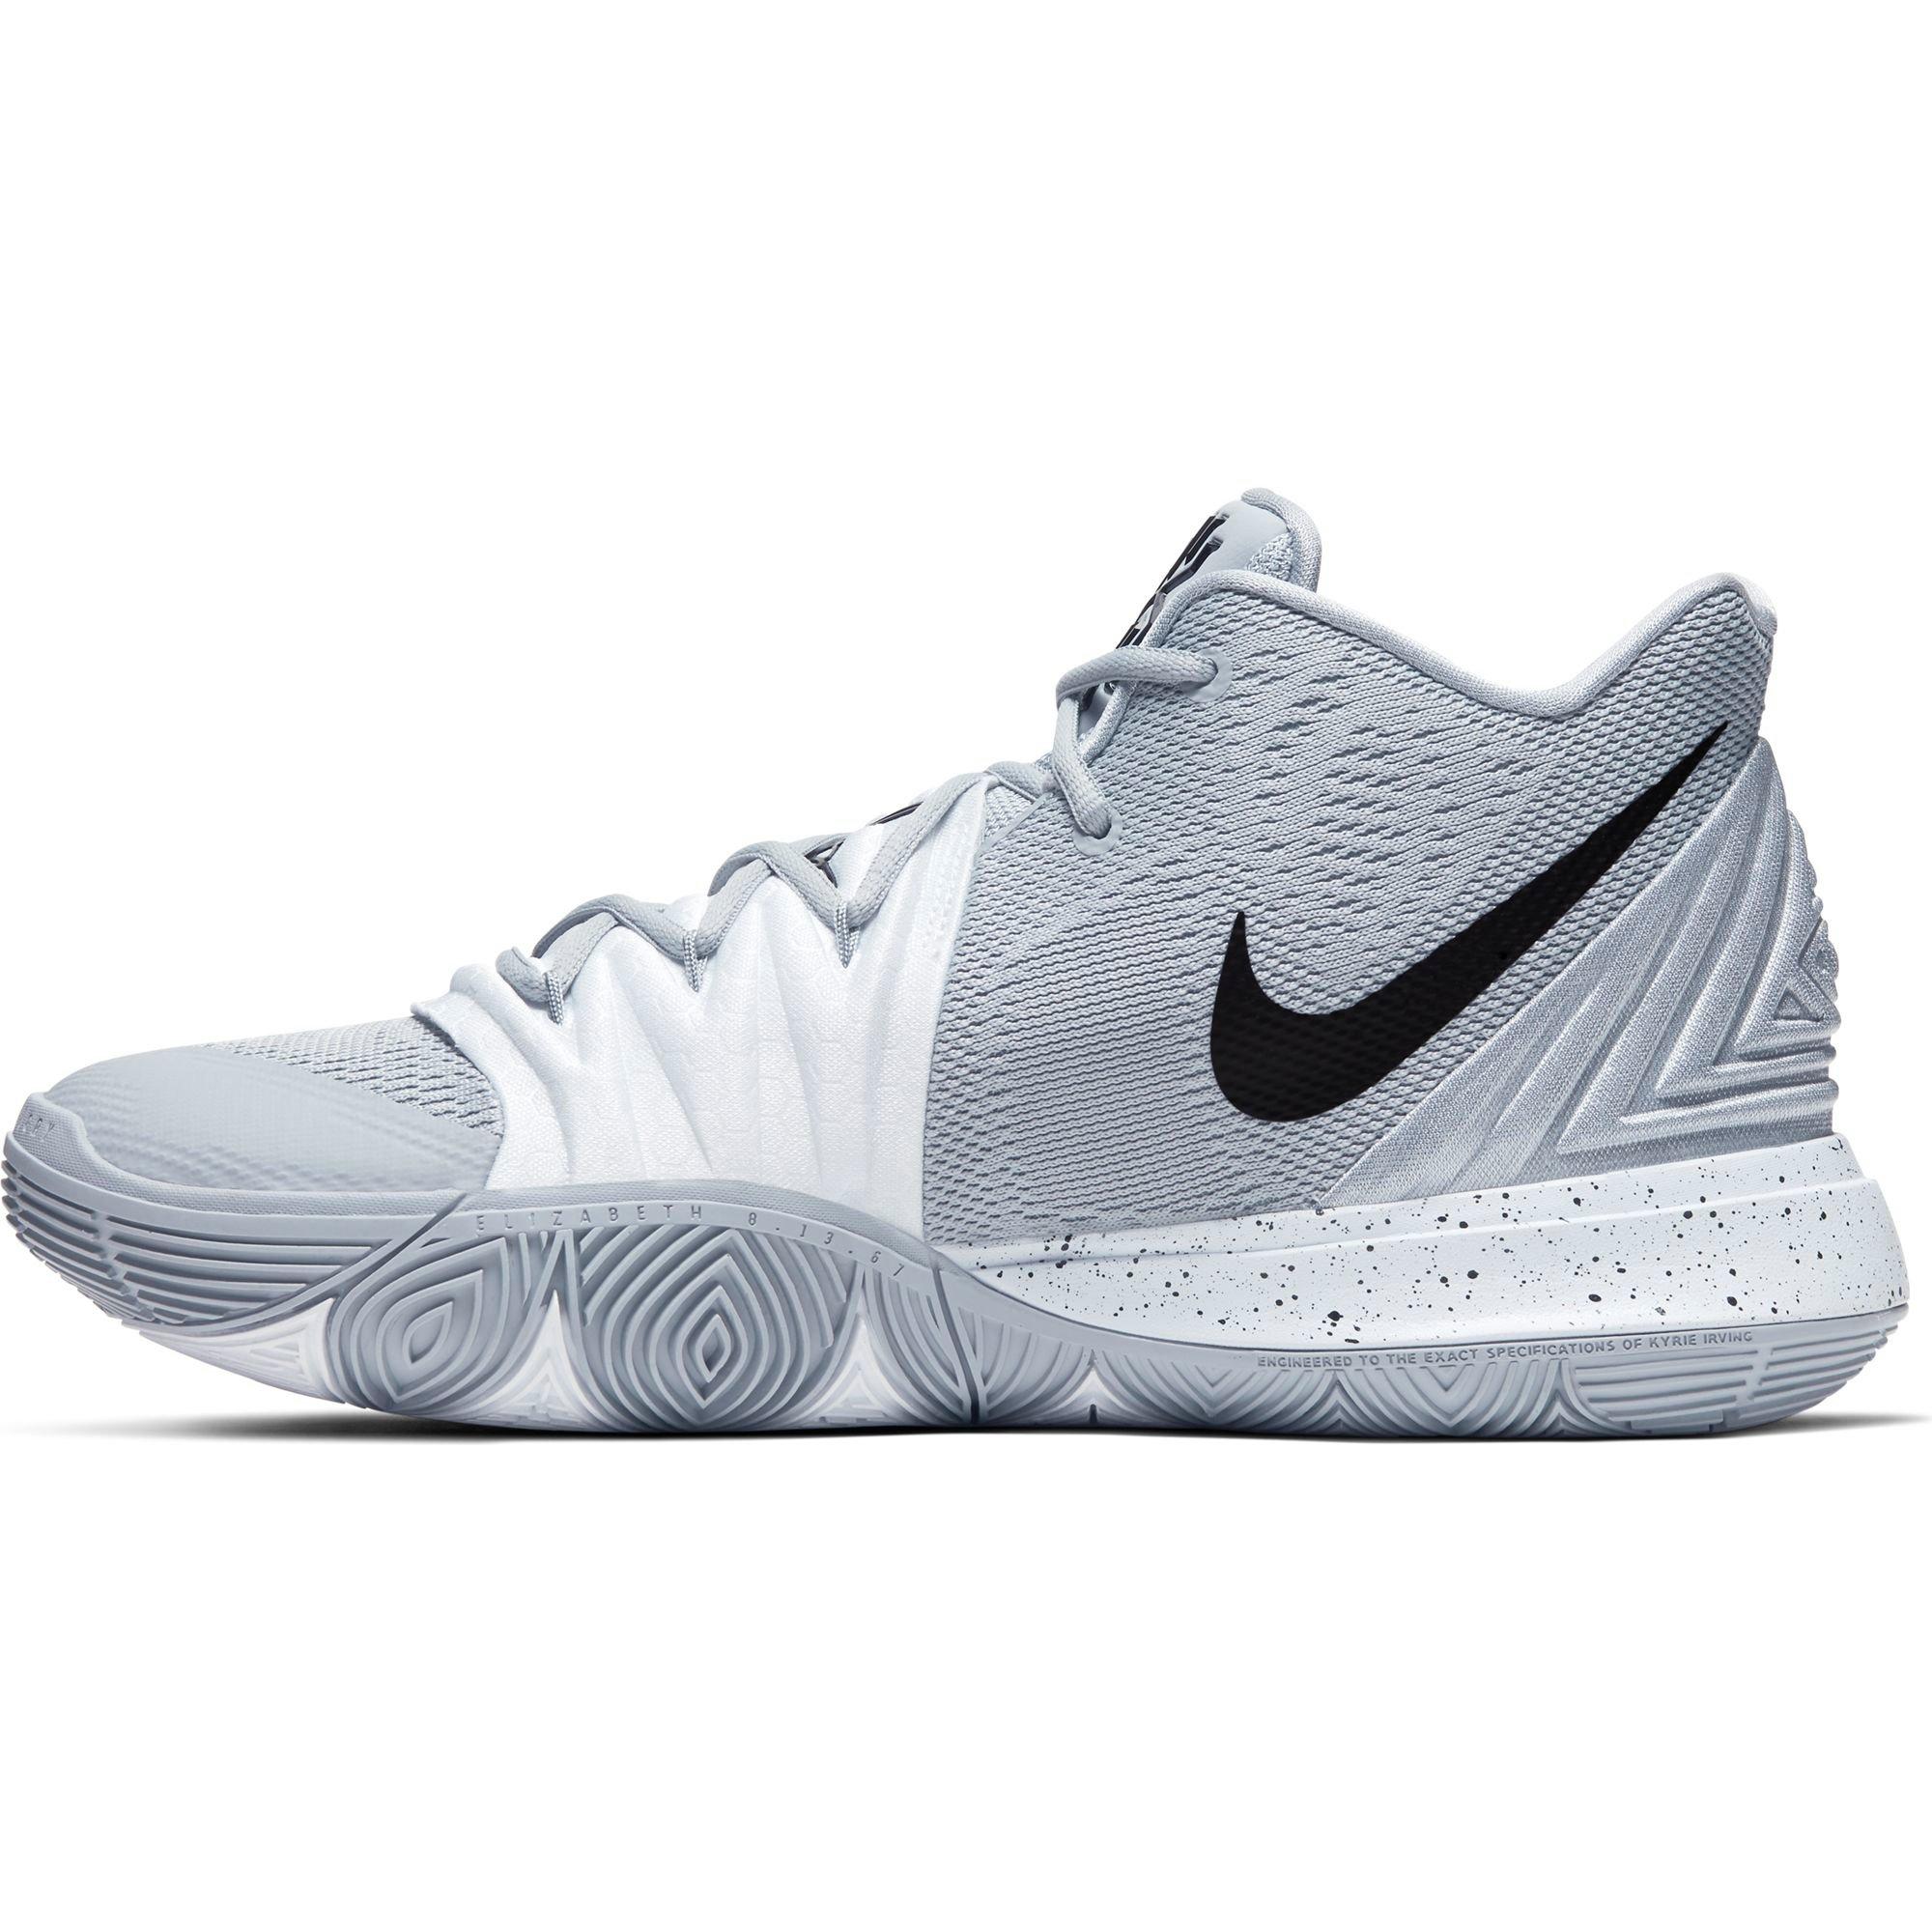 Kyrie 5 Family friend edition Men 's Basketball shoes Shopee